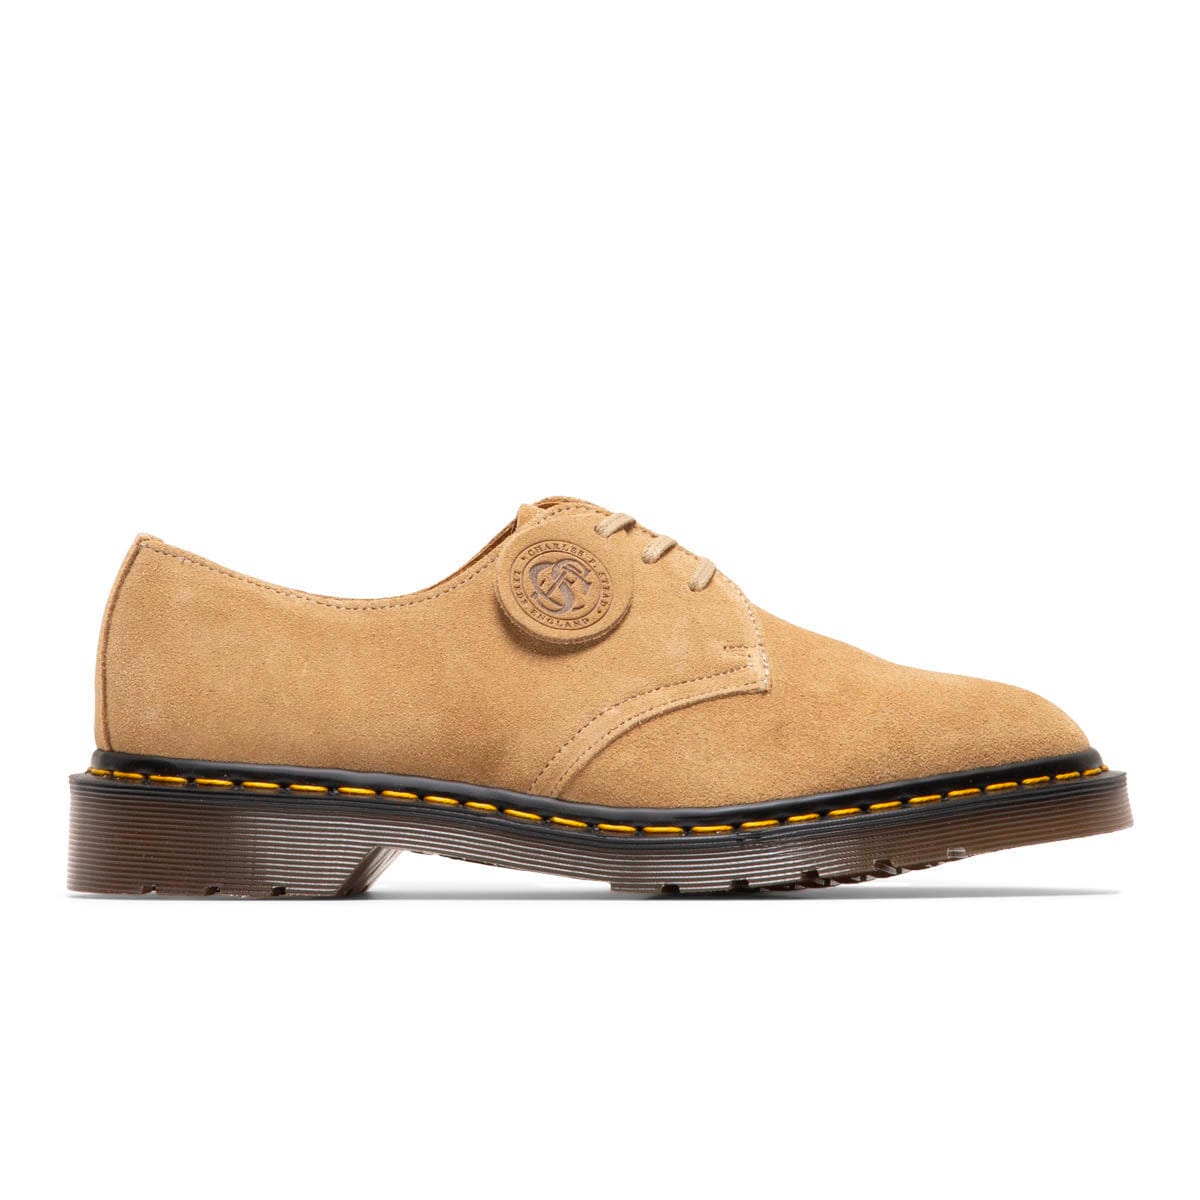 Dr. Martens Casual 1461 OXFORD SHOES